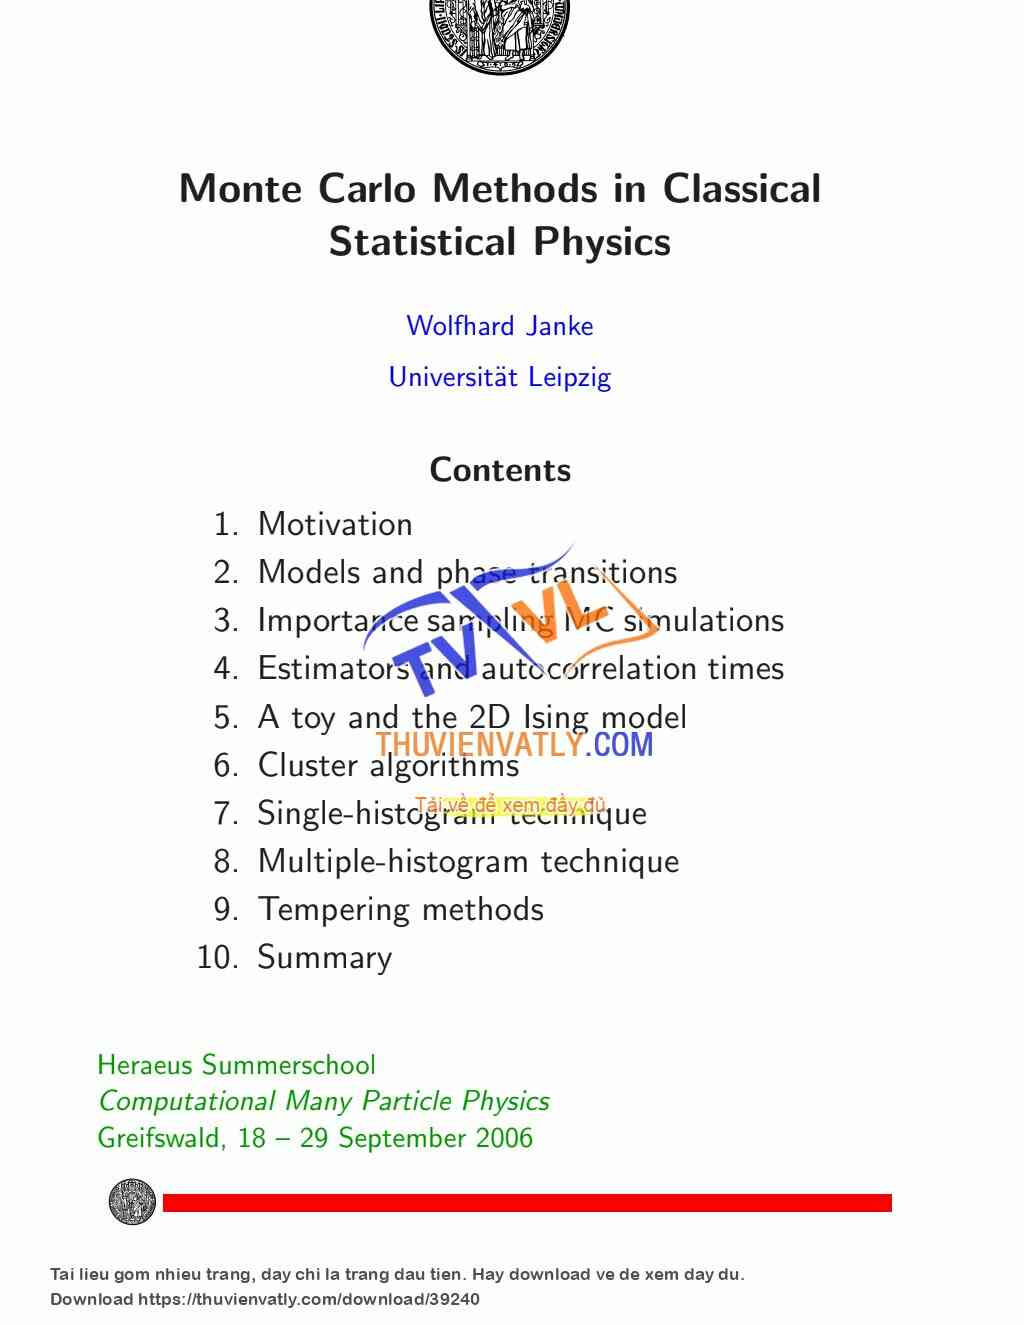 Monte Carlo Methods in Classical Statistical Physics